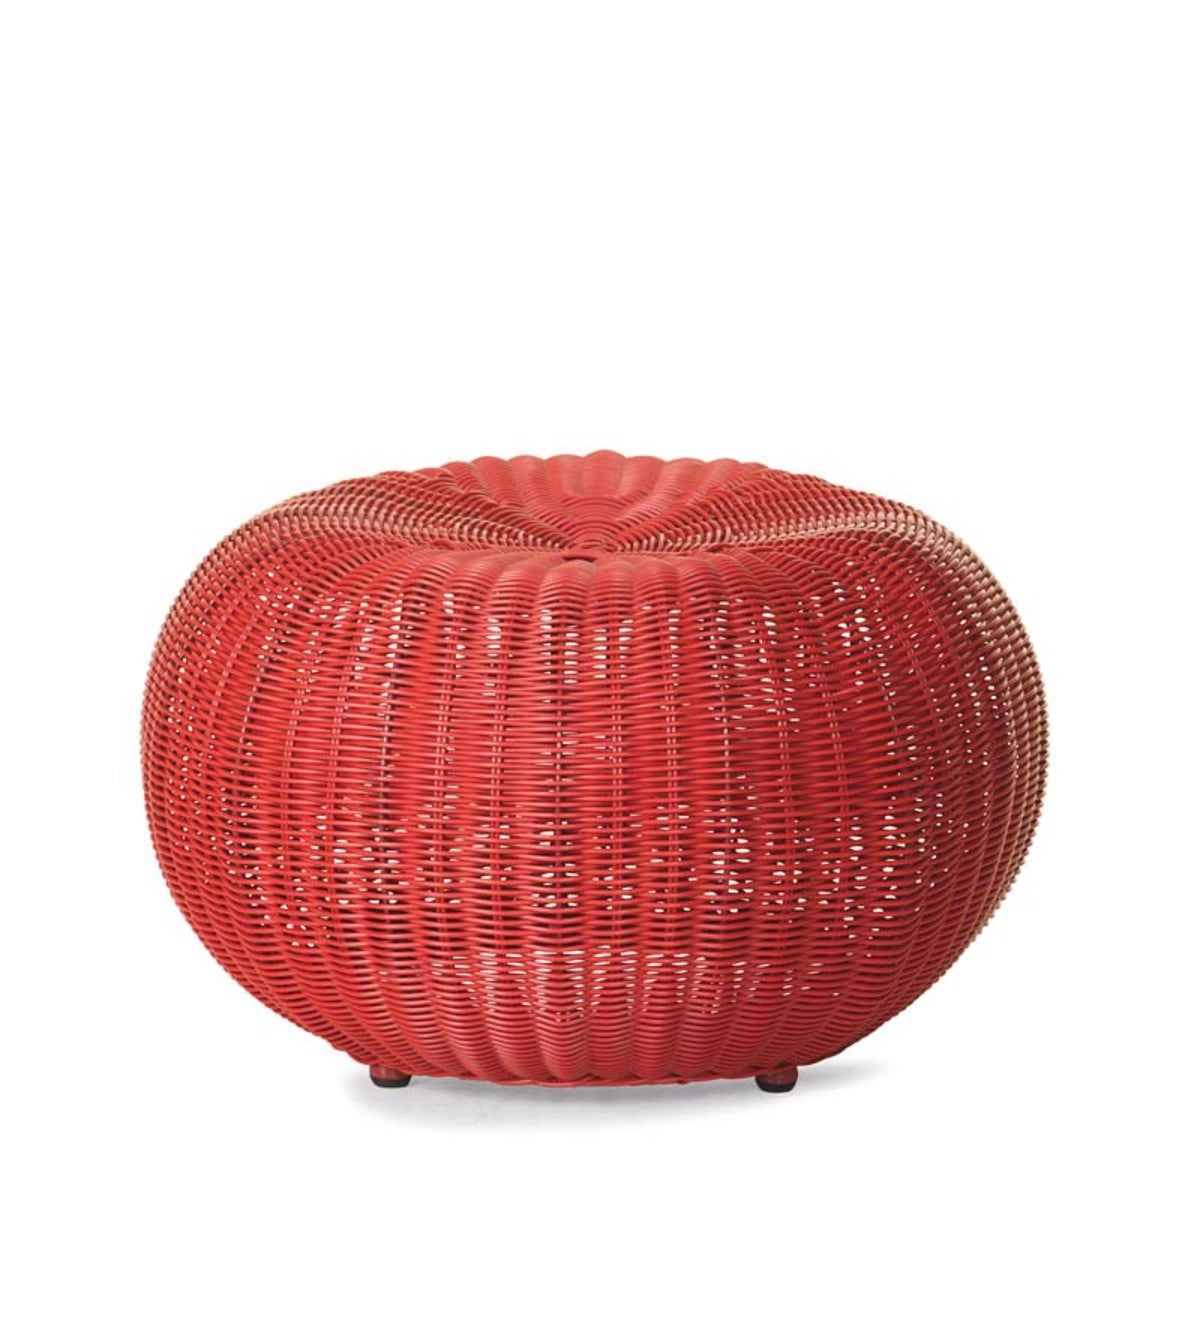 Our outdoor wicker ottoman poufs will transform your outdoor decor